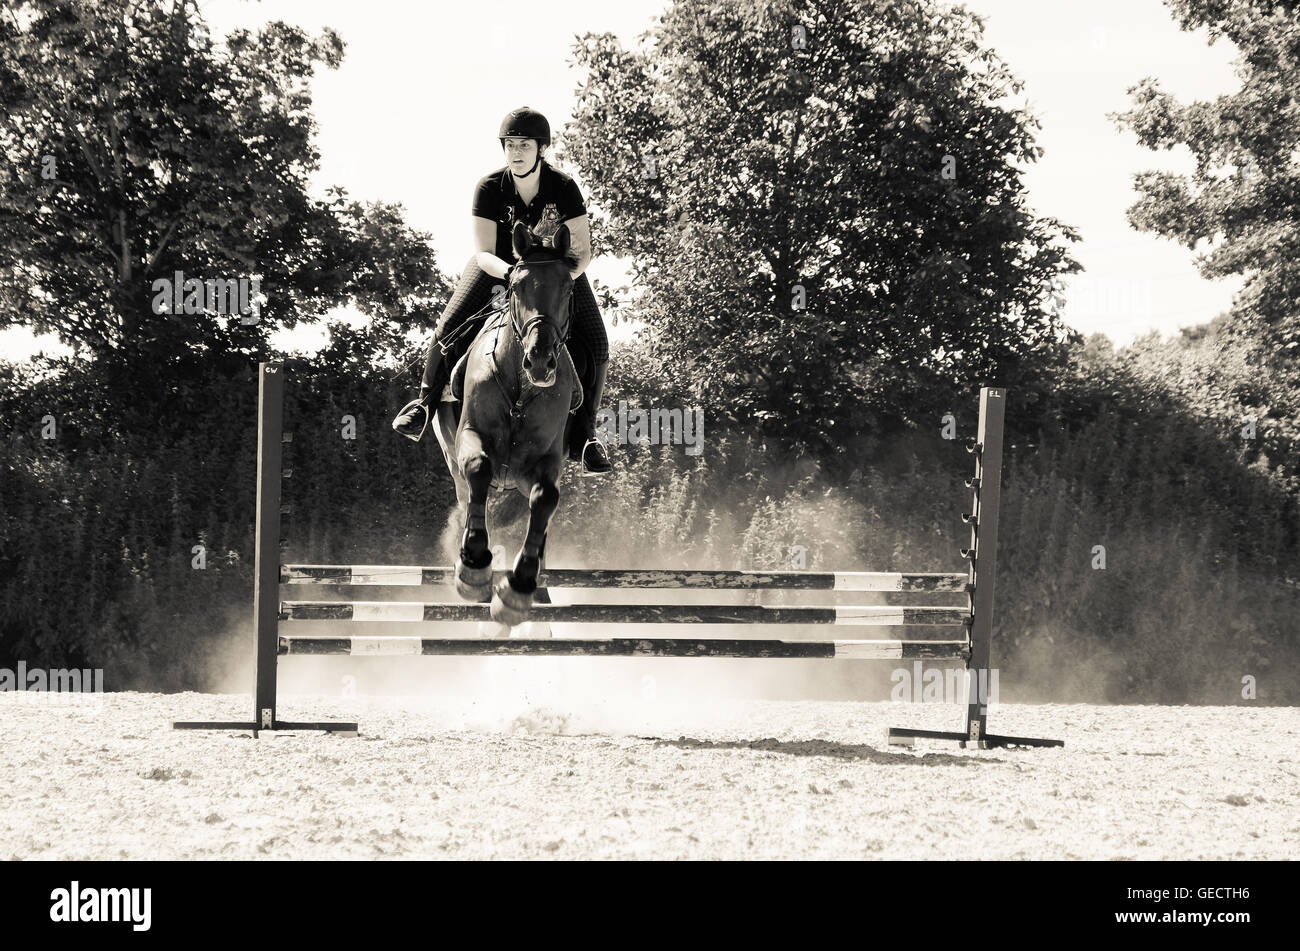 Female rider clearing an obstacle during a horse jumping practice, black-and-white Stock Photo